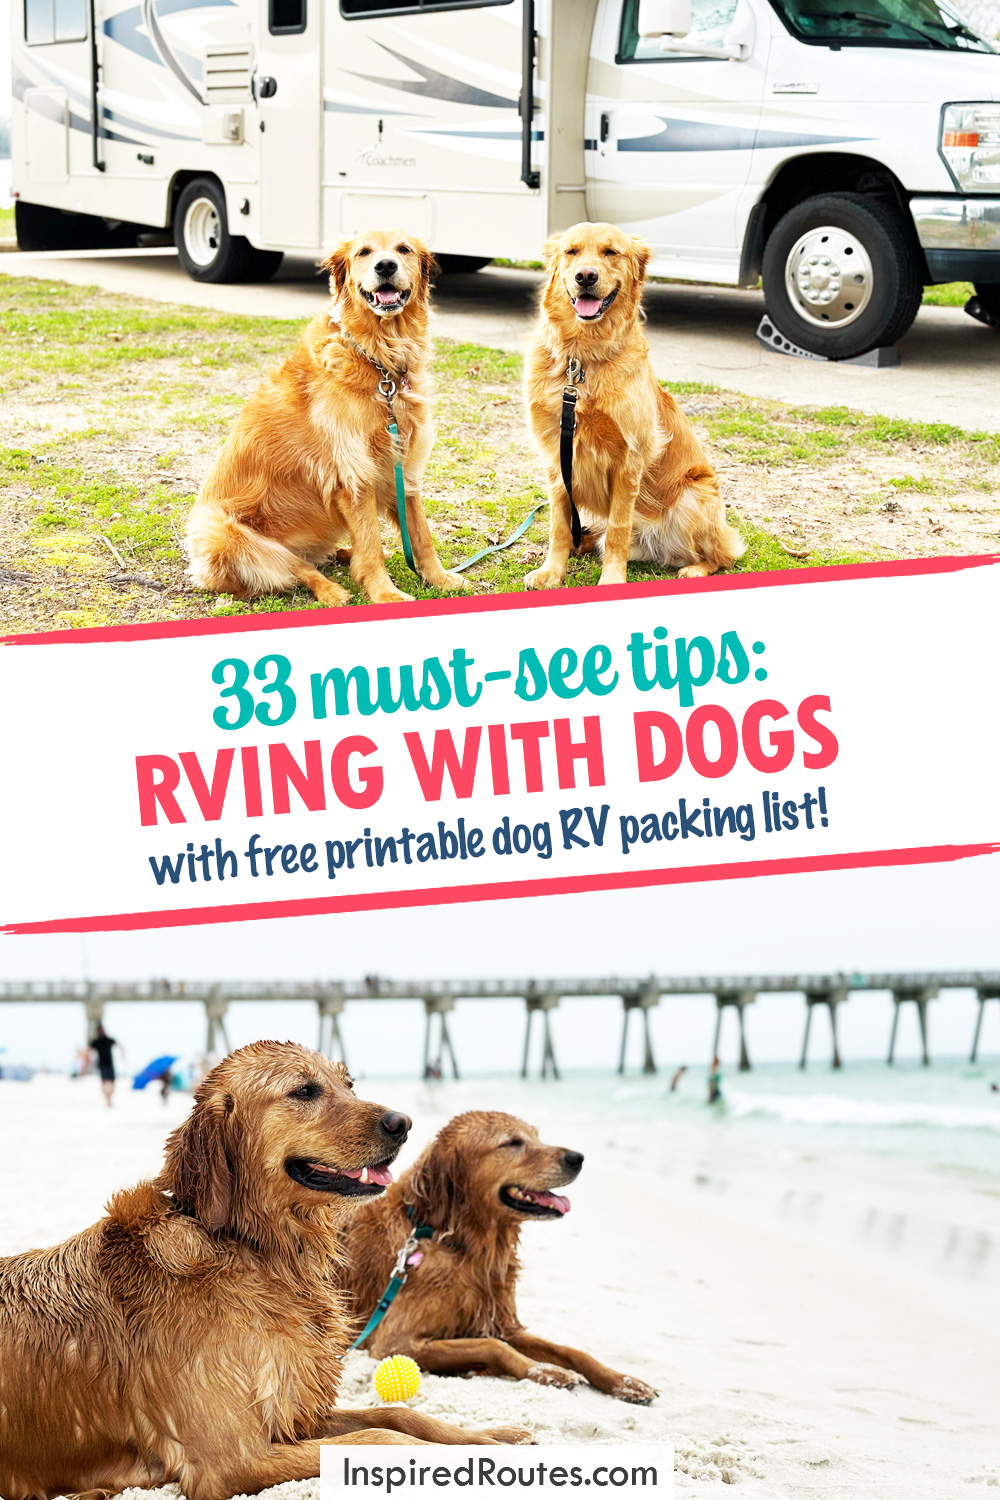 text that reads 33 must-see tips: rving with dogs with free printable dog RV packing list and photos of two dogs on beach and in front of RV